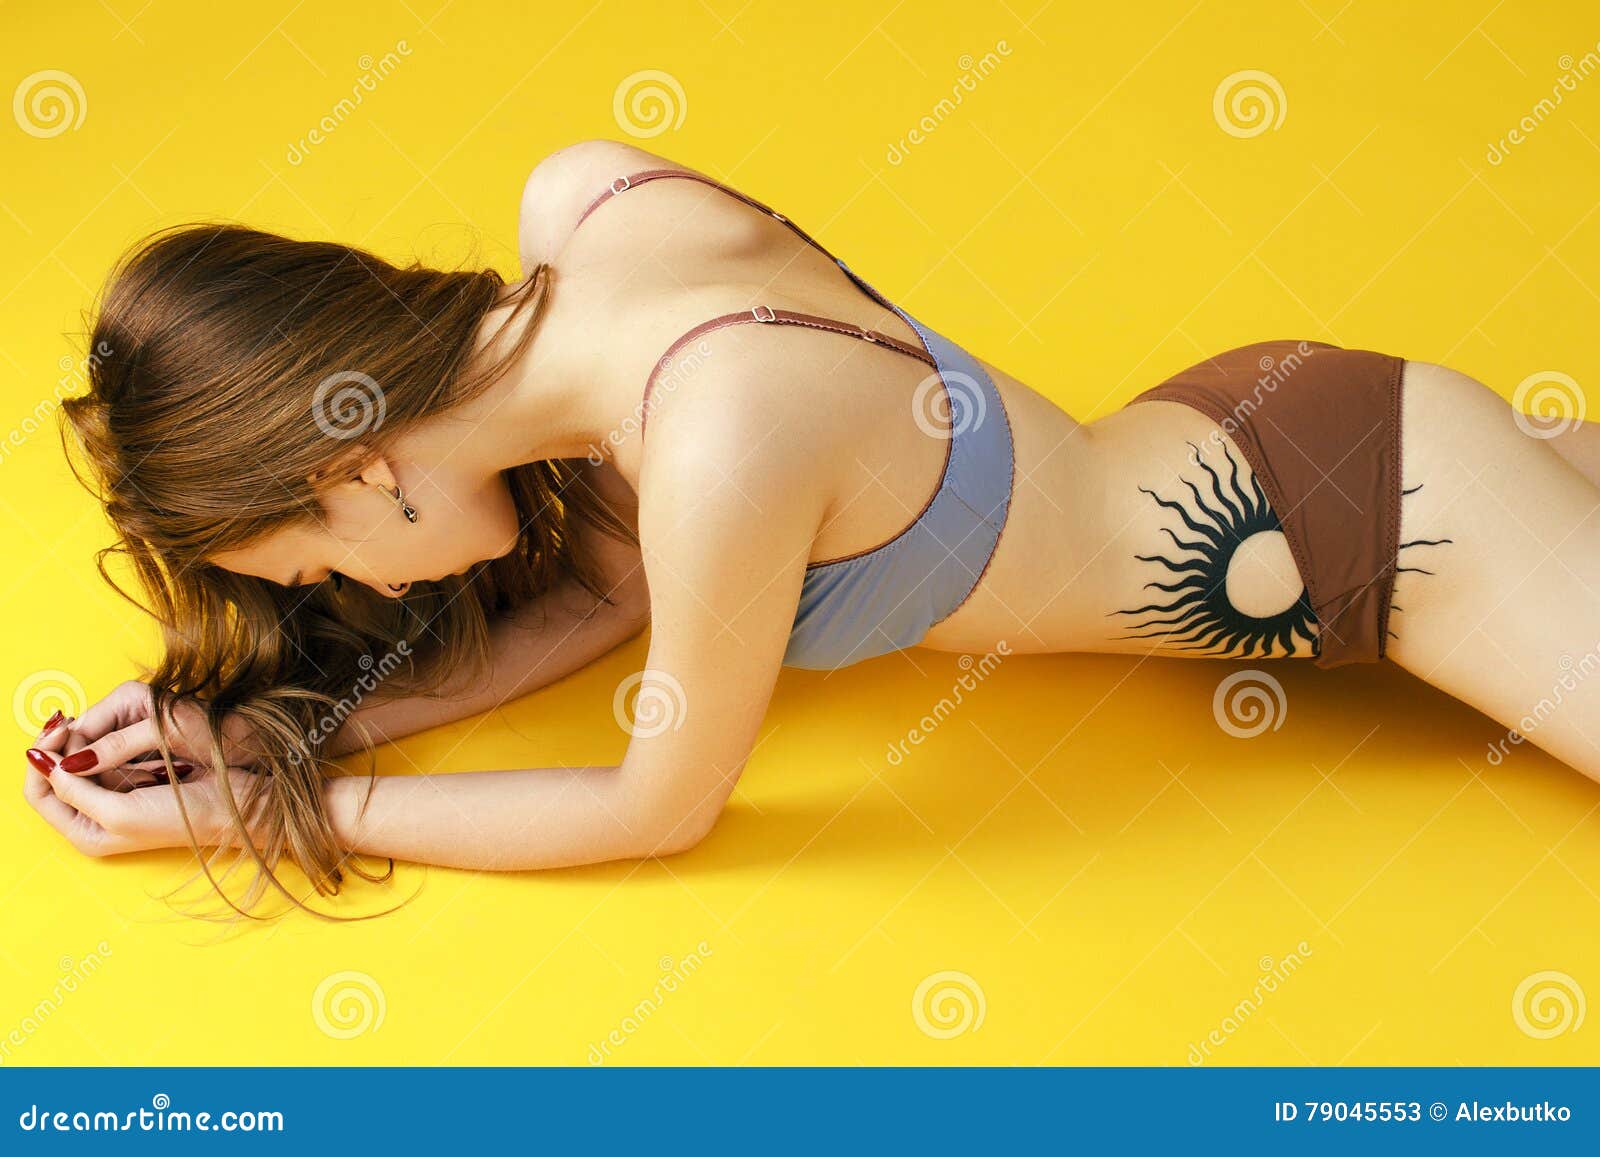 Skinny Girl on a Yellow Background in Beautiful Lingerie Stock Image -  Image of underwear, black: 79045553